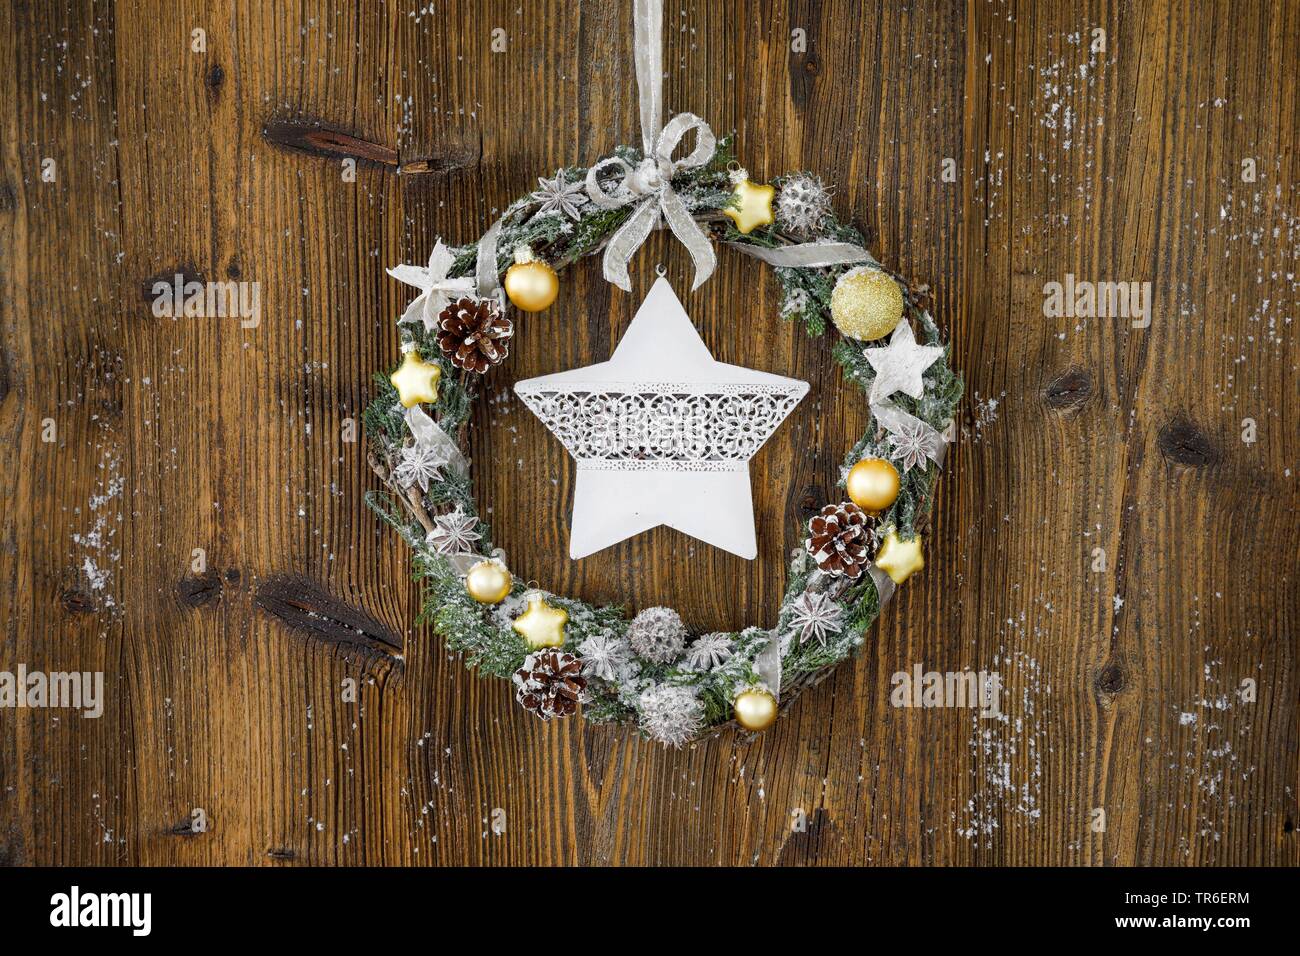 with Advent wreath at a wooden door, Switzerland Stock Photo